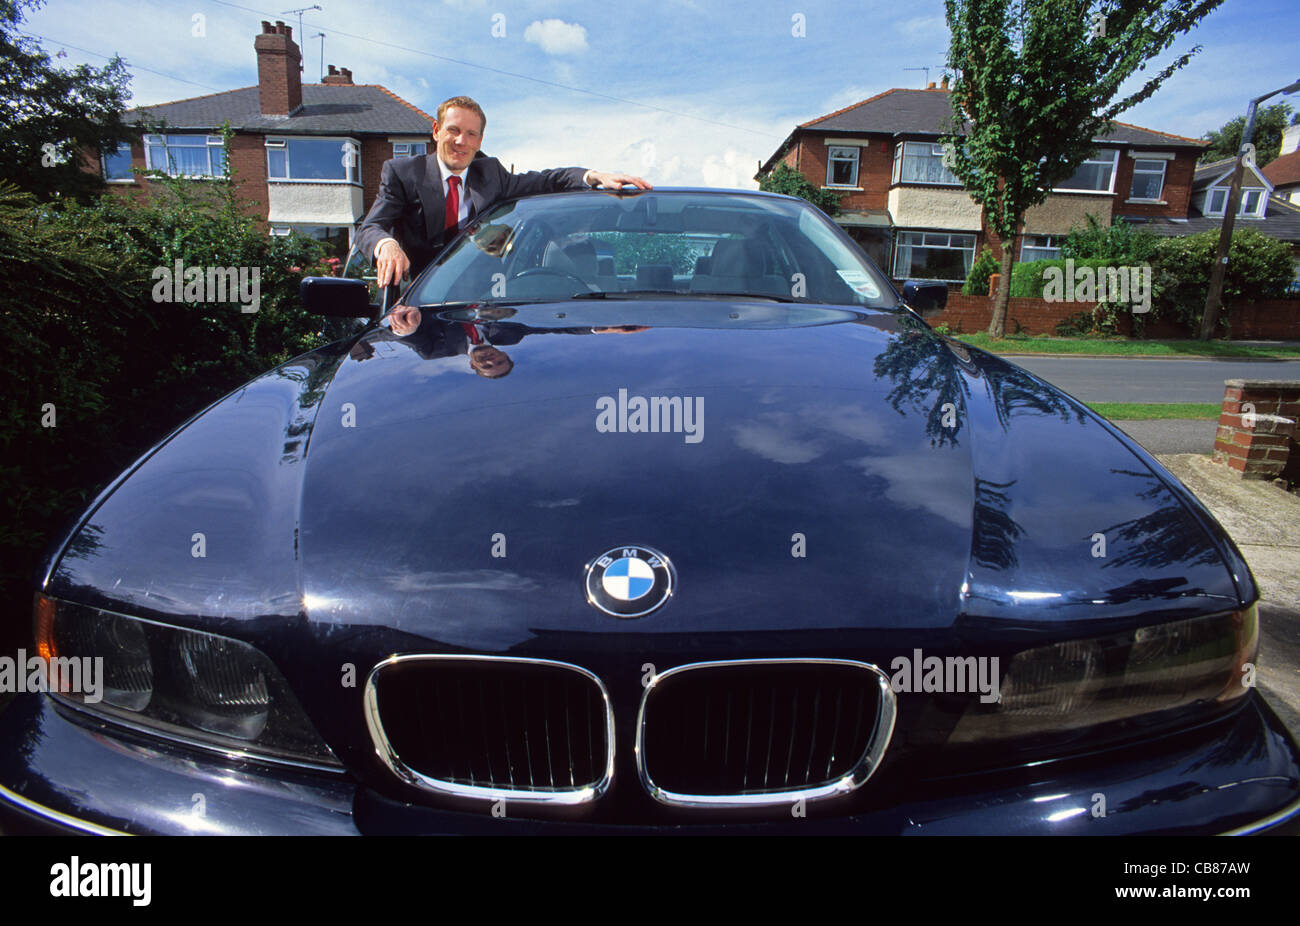 businessman leaning on bonnet of company car Stock Photo